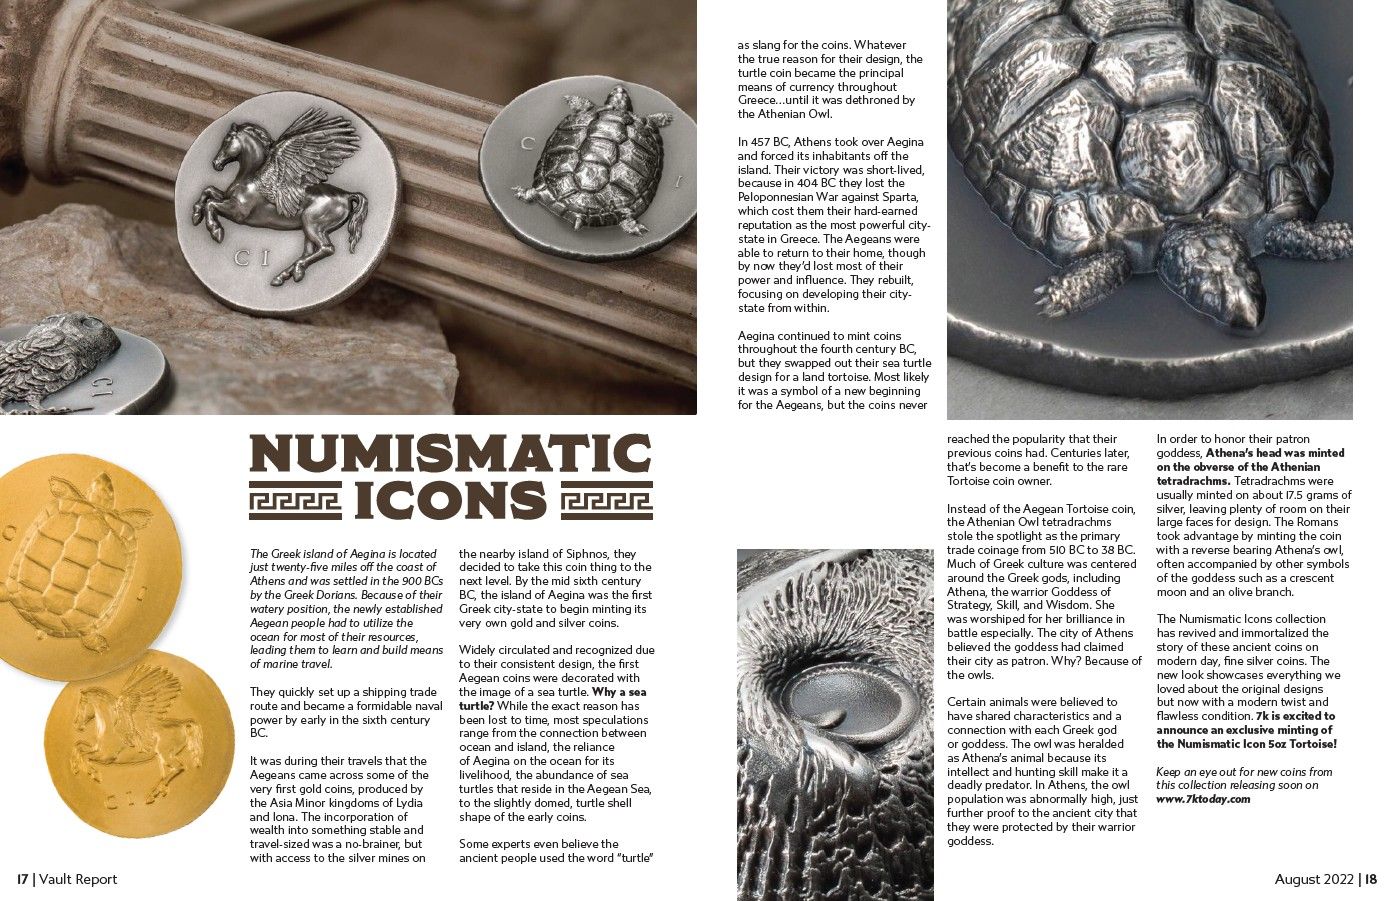 Numismatic Icons Coin Collection